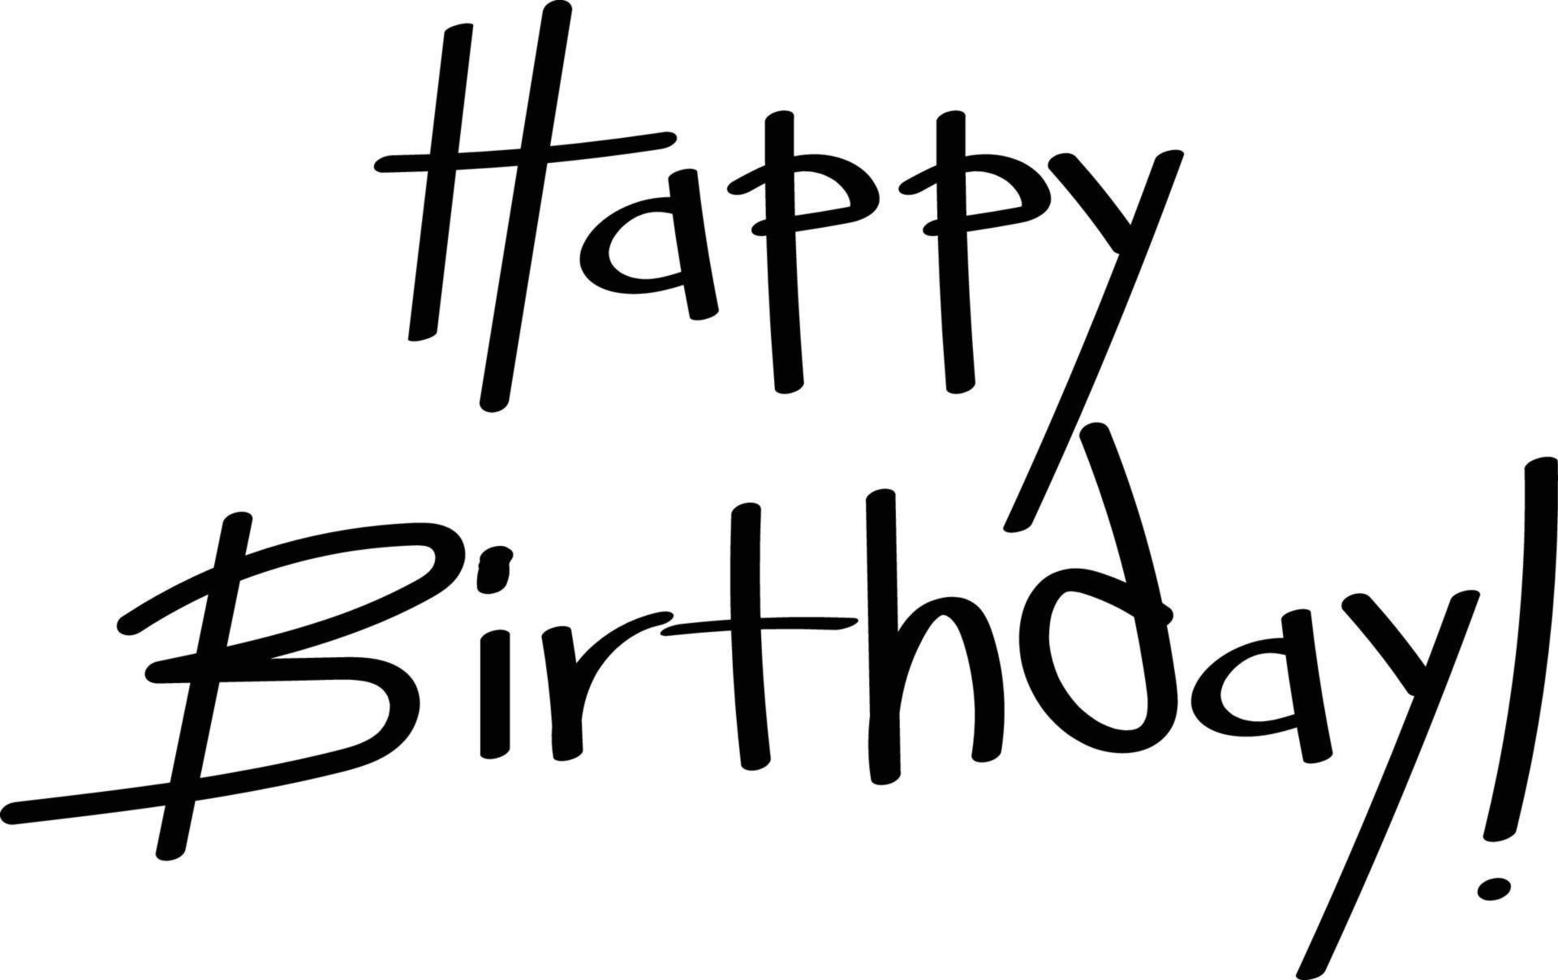 Happy Birthday Hand Written Lettered Text vector